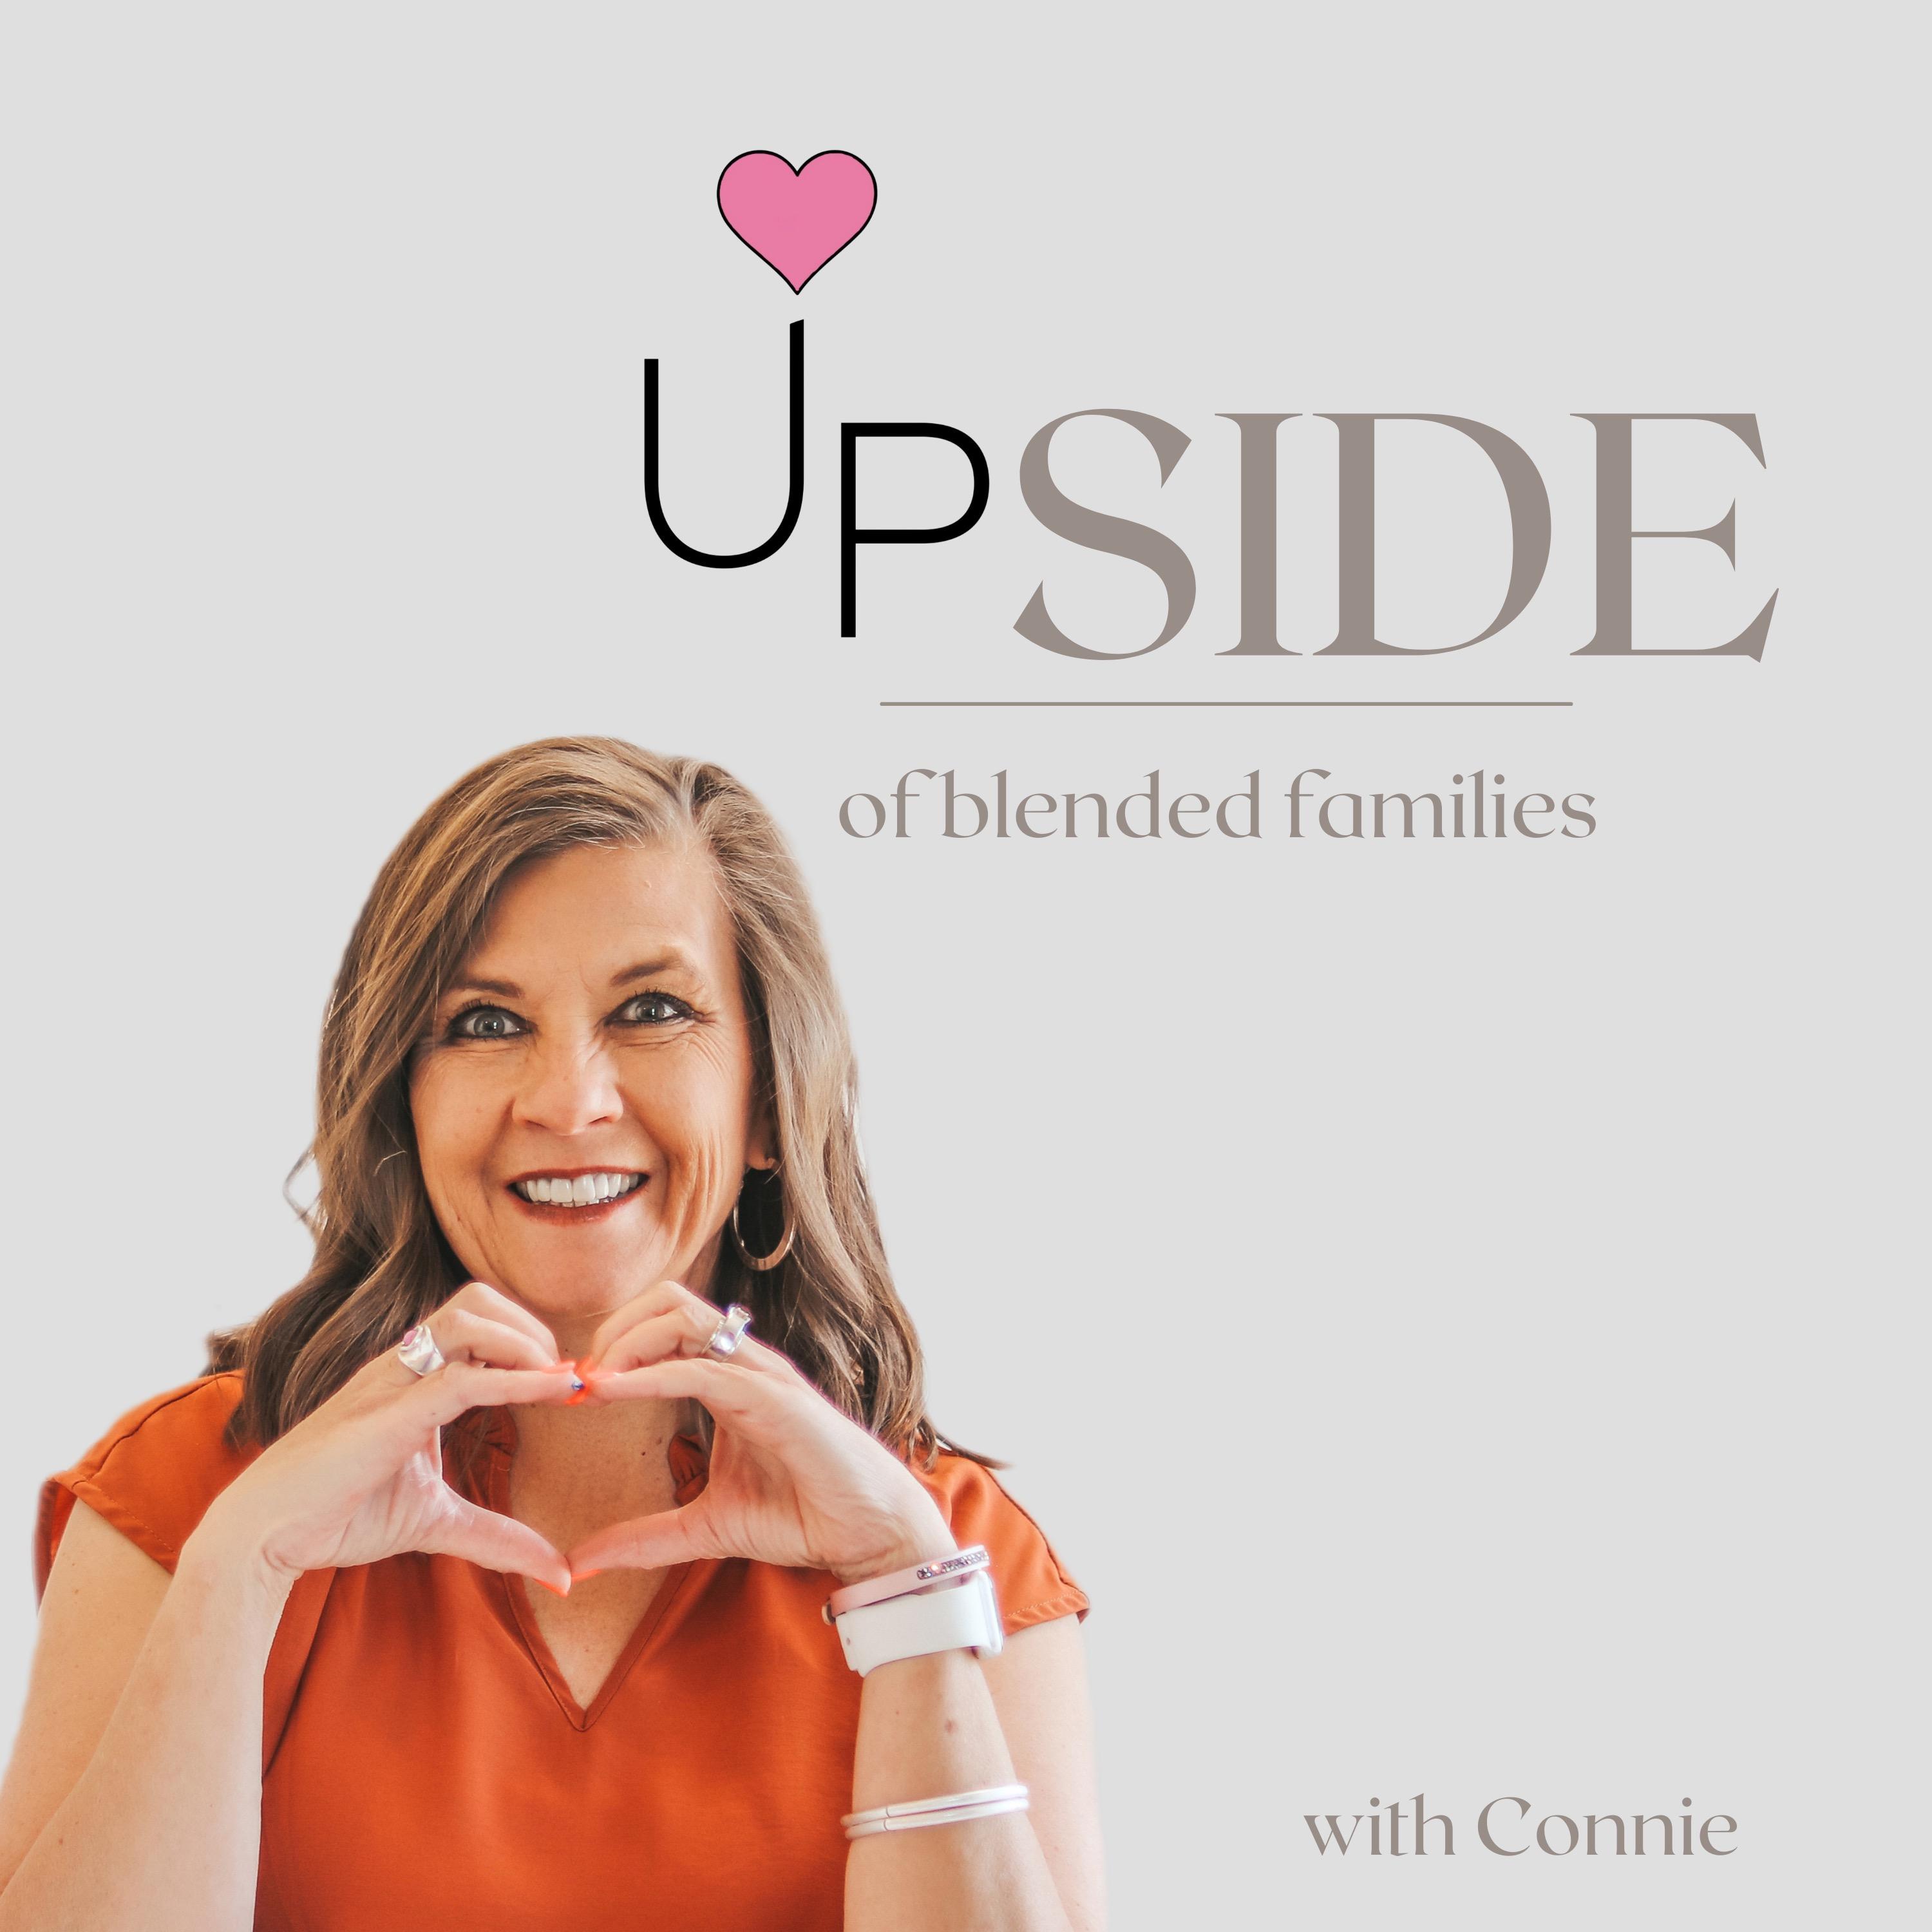 The Upside of Blended Families 